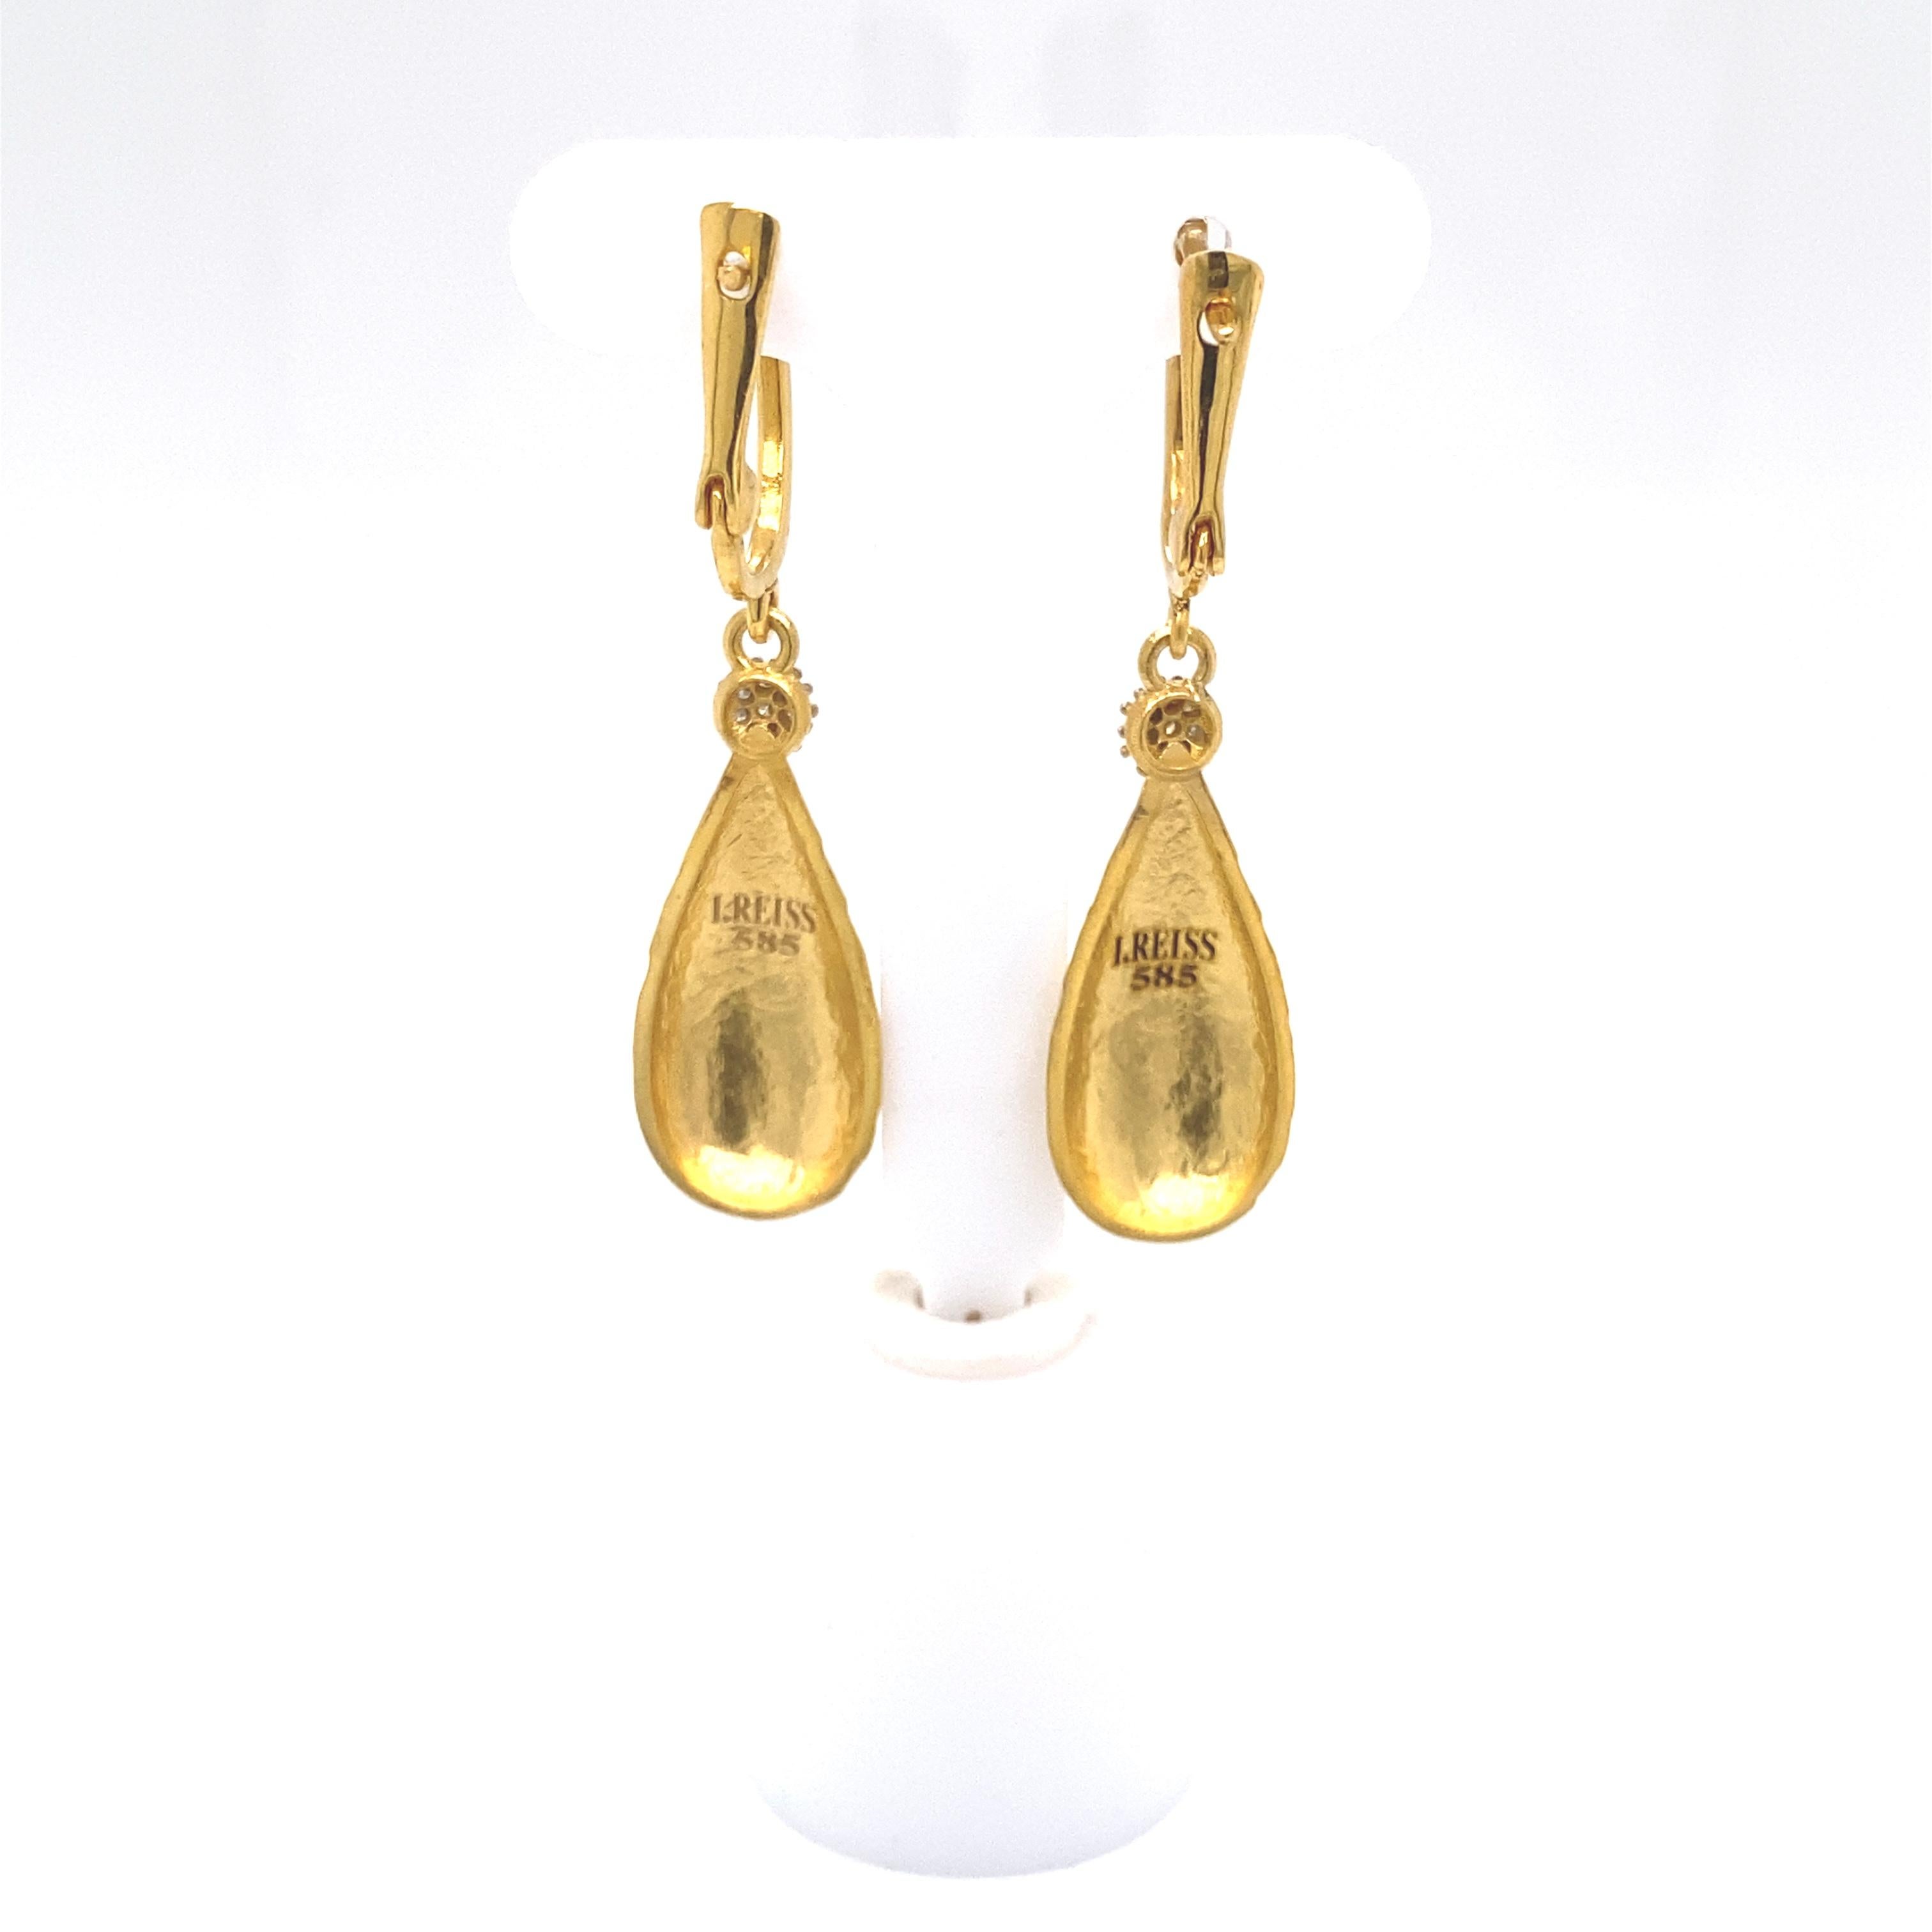 14 Karat Yellow Gold Hand-Crafted Matte and Hammer-Finished Dangling Tear-Drop Earrings, Accented with 0.20 Carats of Pave Set Diamonds.
